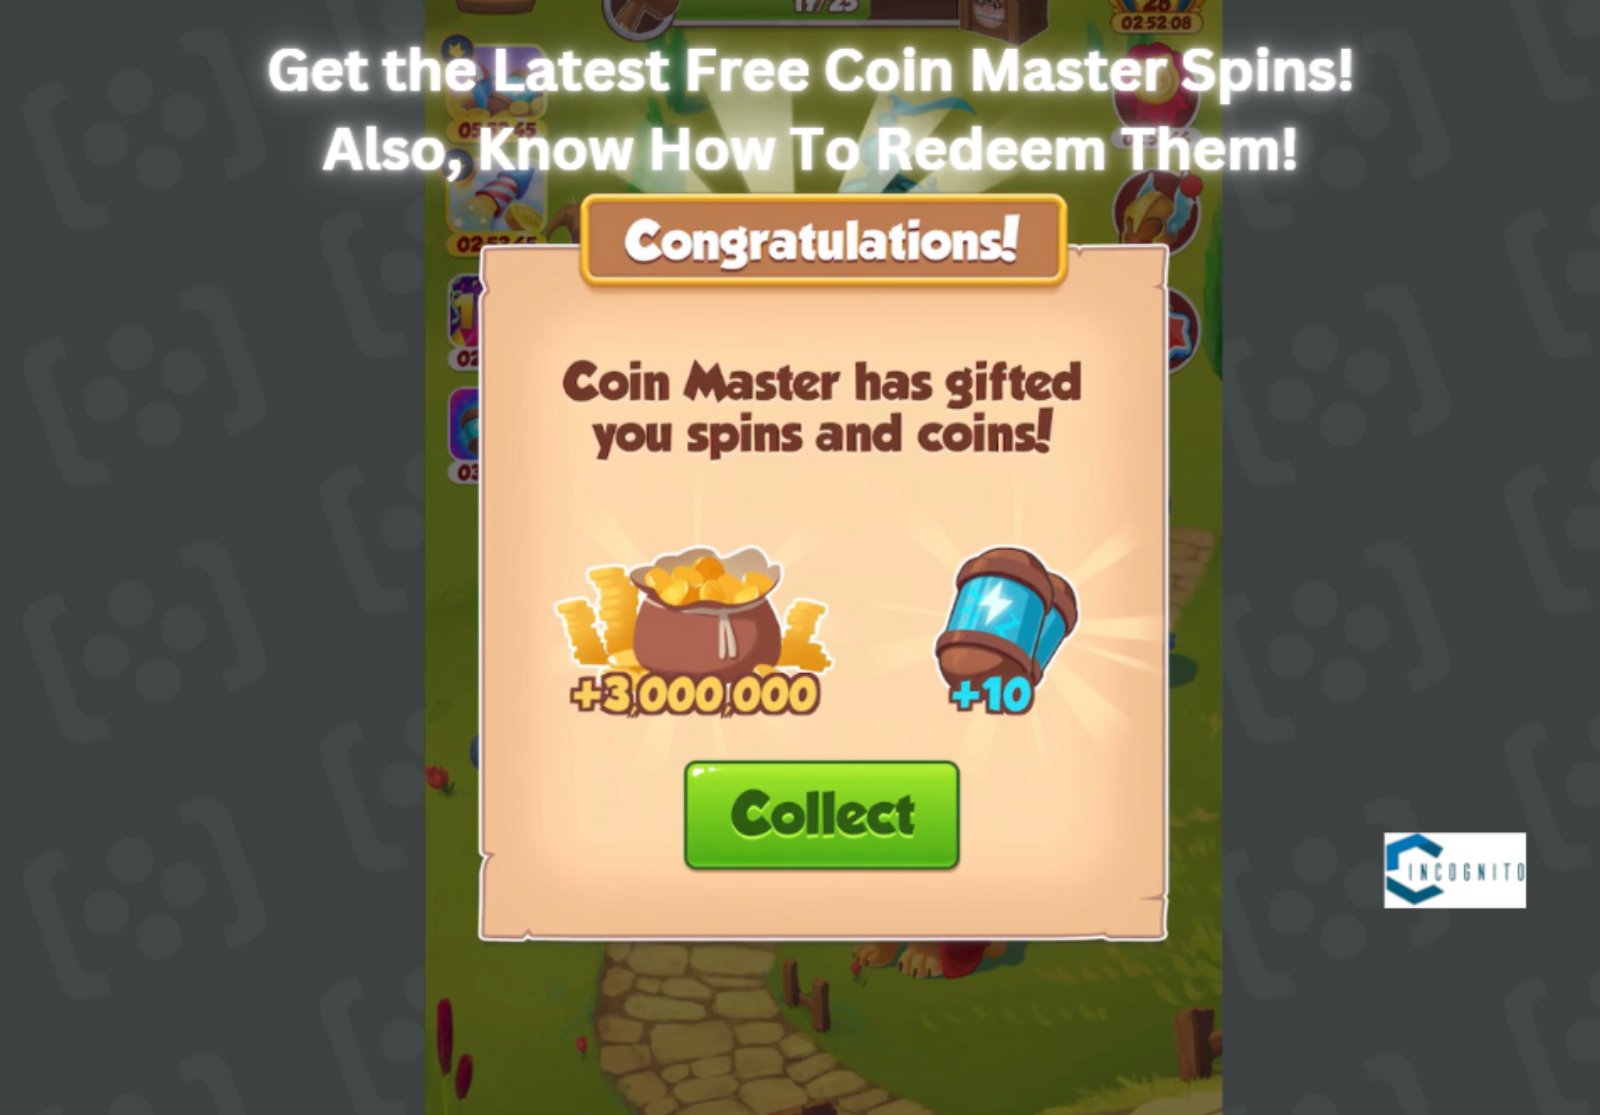 Get the Latest Free Coin Master Spins Links! Also, Know How To Redeem Them!